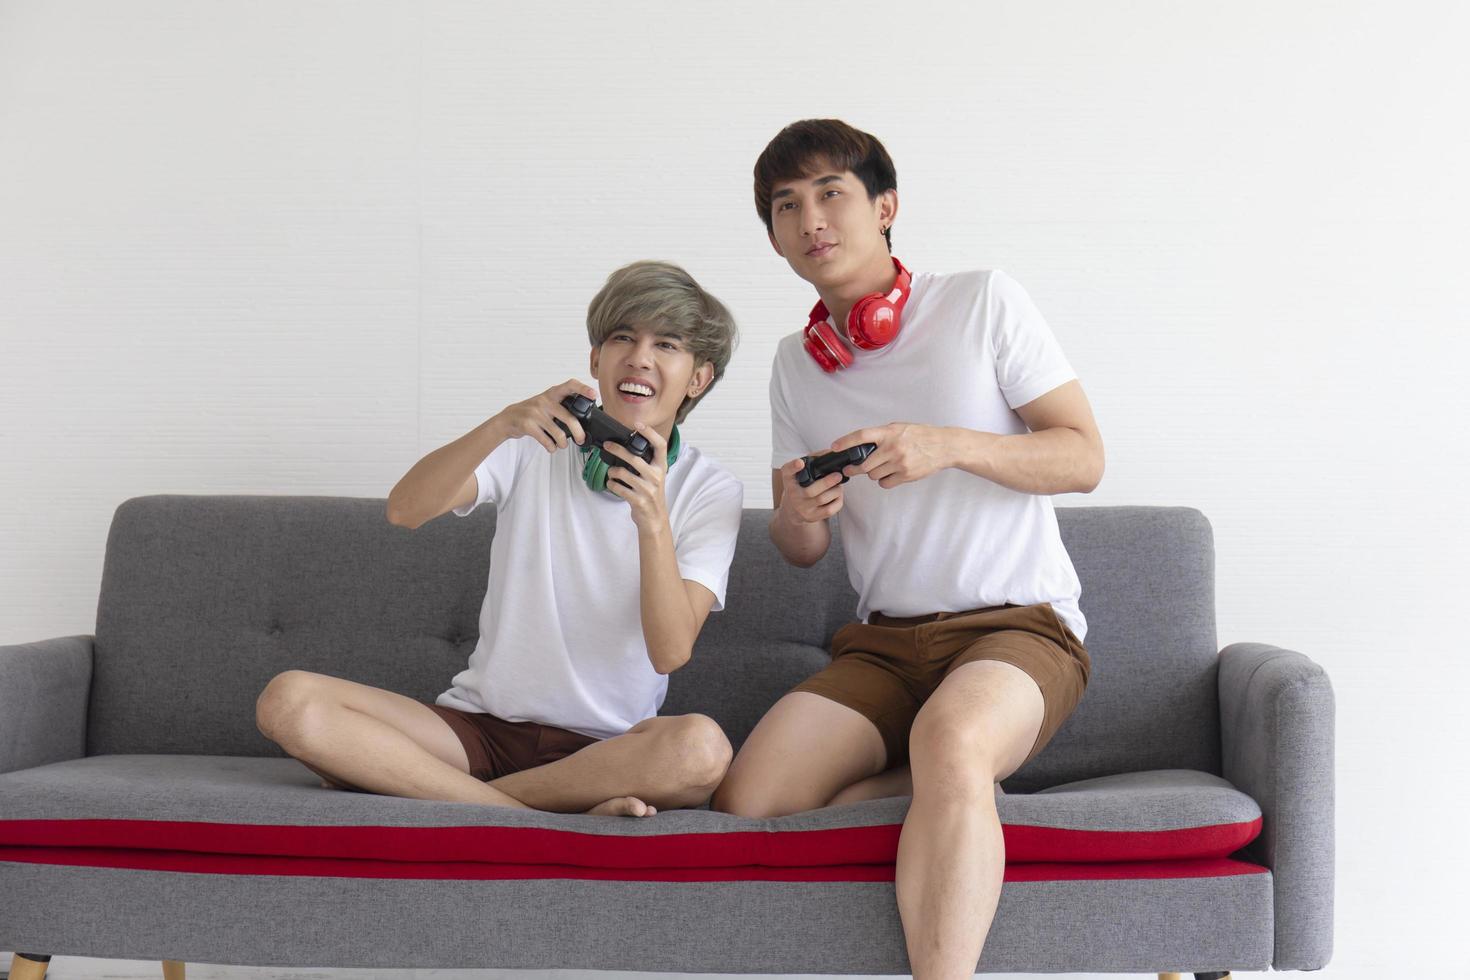 A male couple with an Asian man sitting on a sofa playing video games having fun. photo